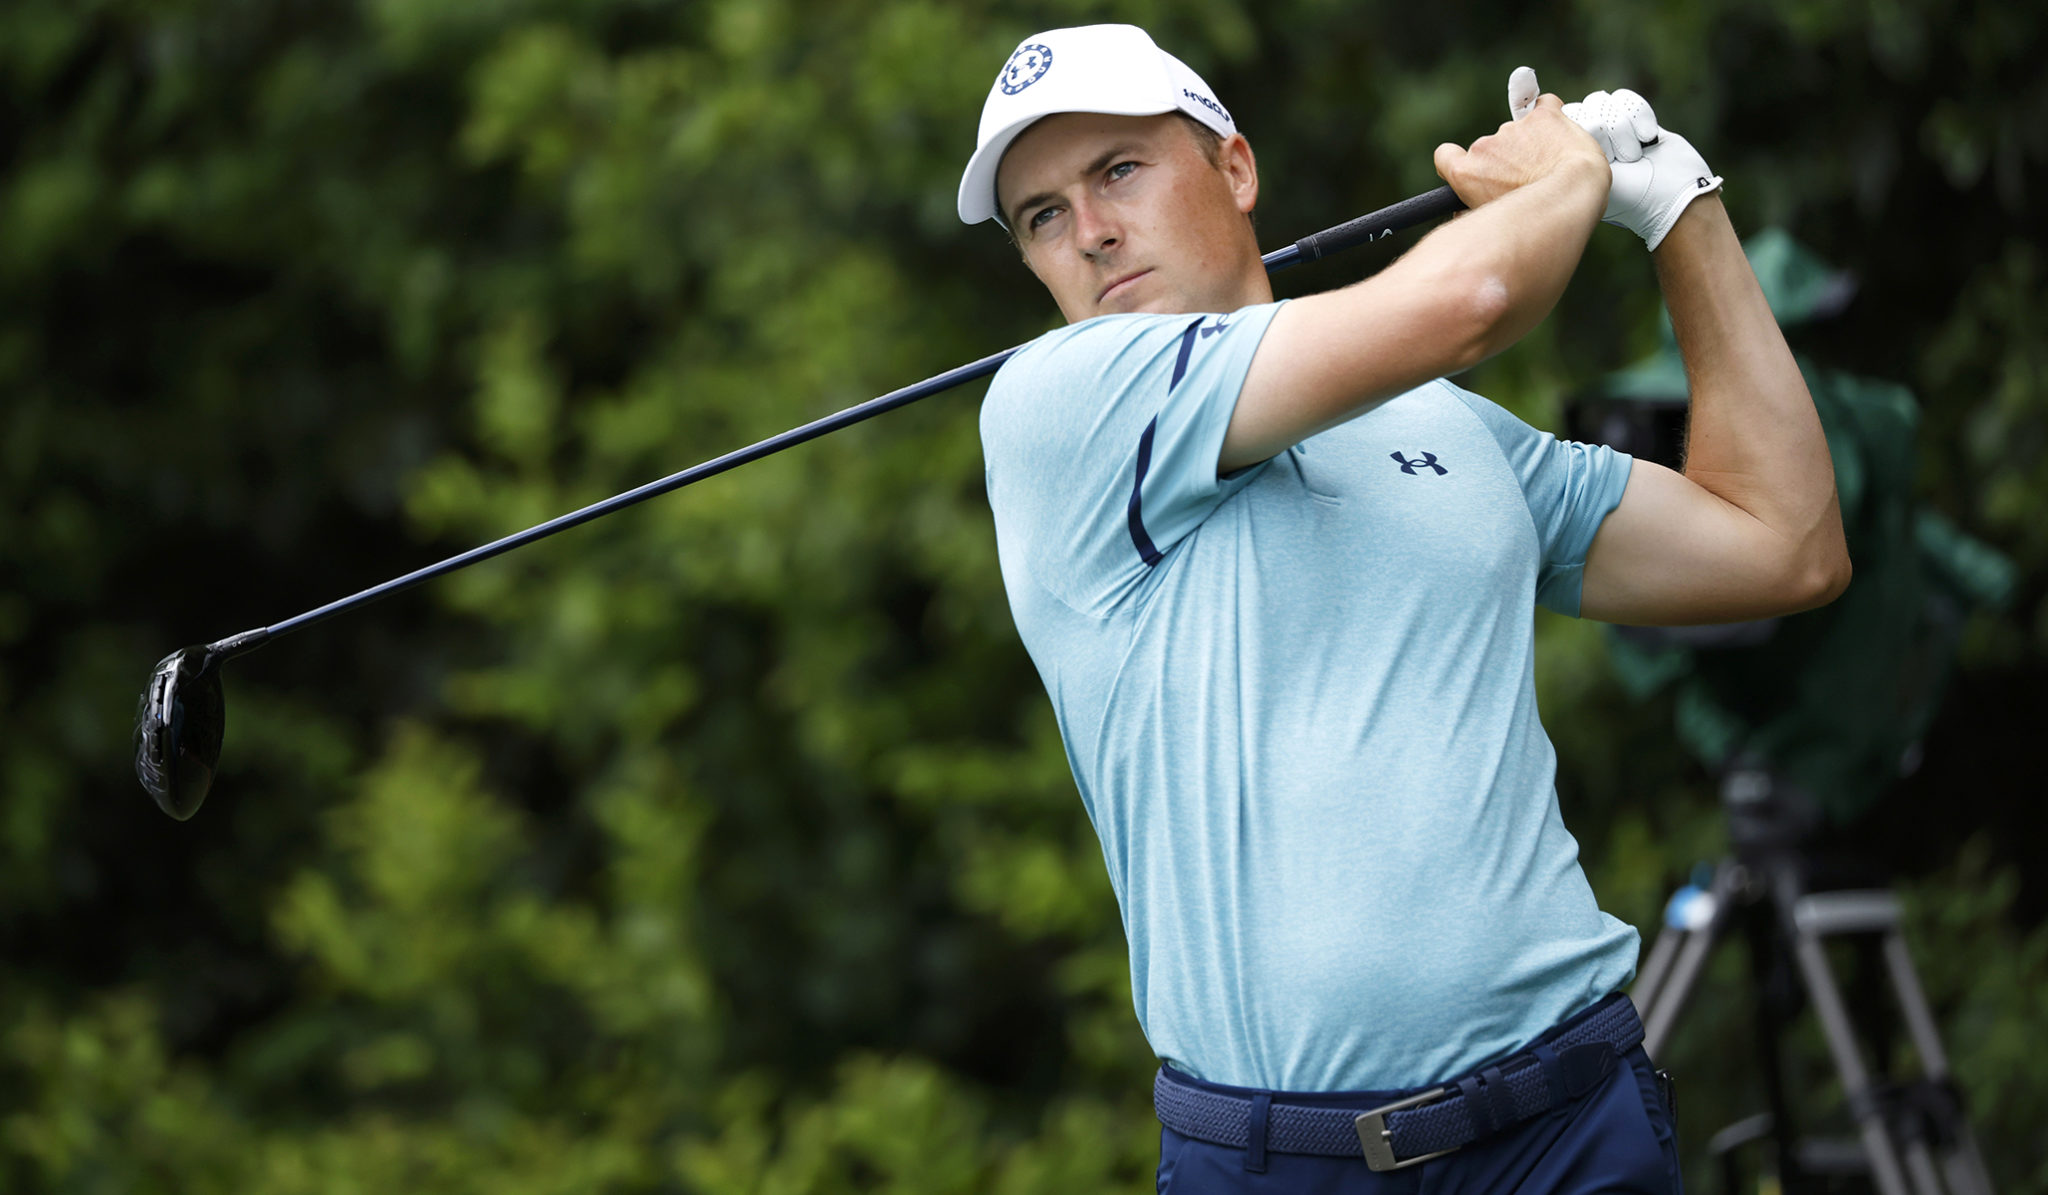 Jordan Spieth | Every shot from his win at RBC Heritage